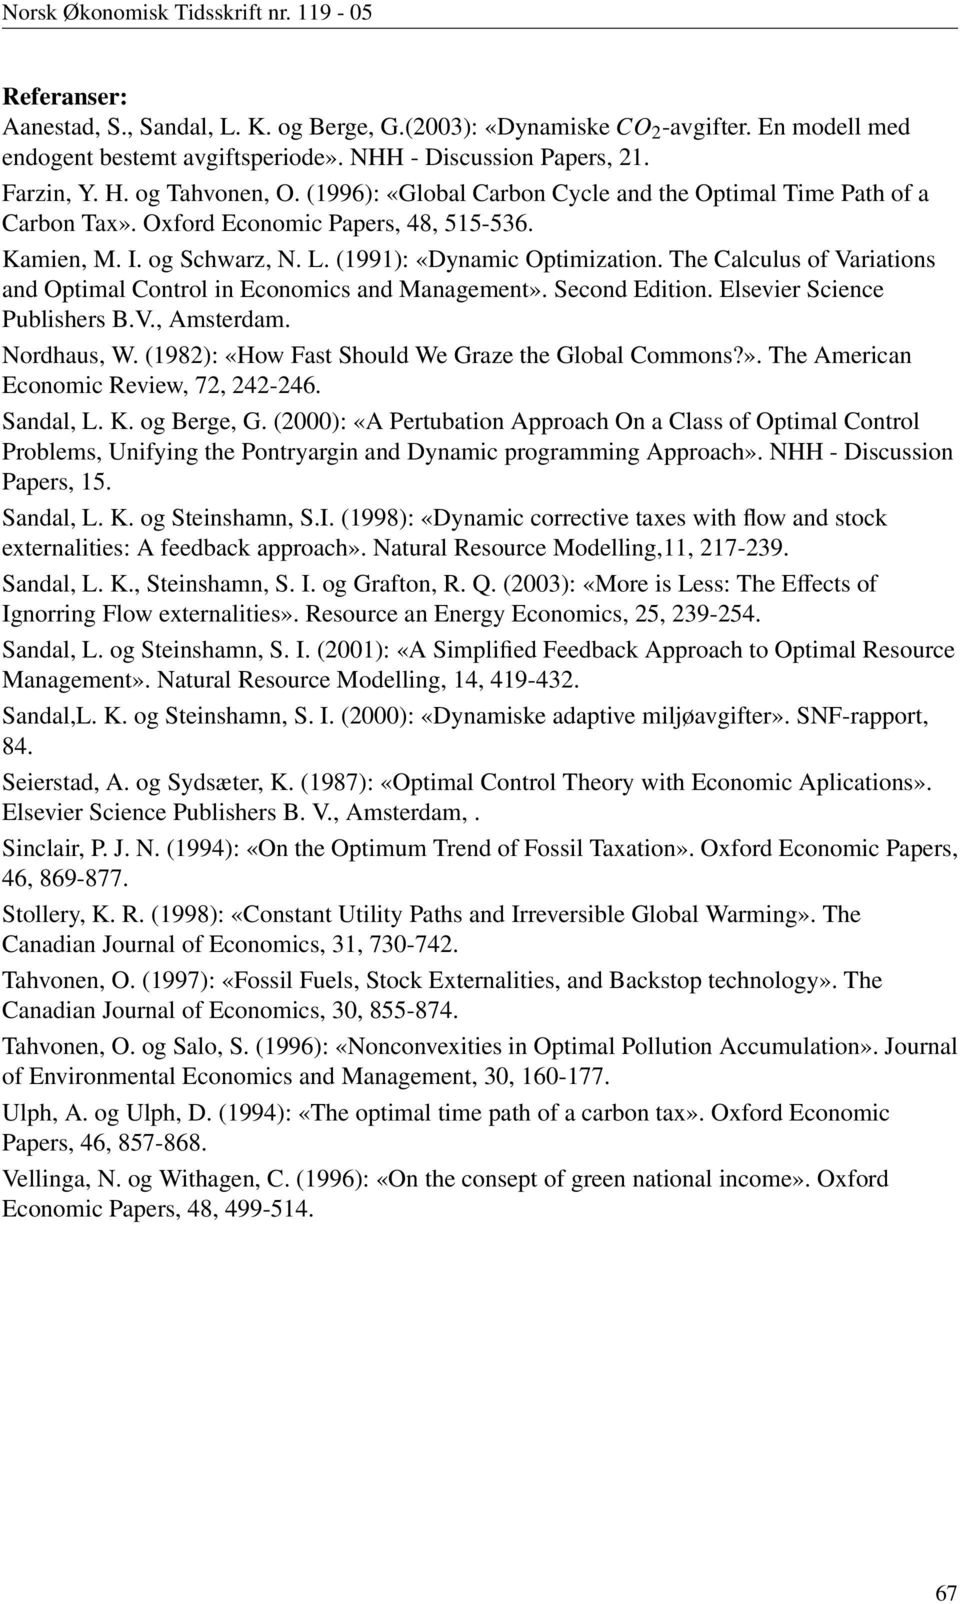 The Calculus of Variaions and Opimal Conrol in Economics and Managemen». Second Ediion. Elsevier Science Publishers B.V., Amserdam. Nordhaus, W. (1982): «How Fas Should We Graze he Global Commons?». The American Economic Review, 72, 242-246.